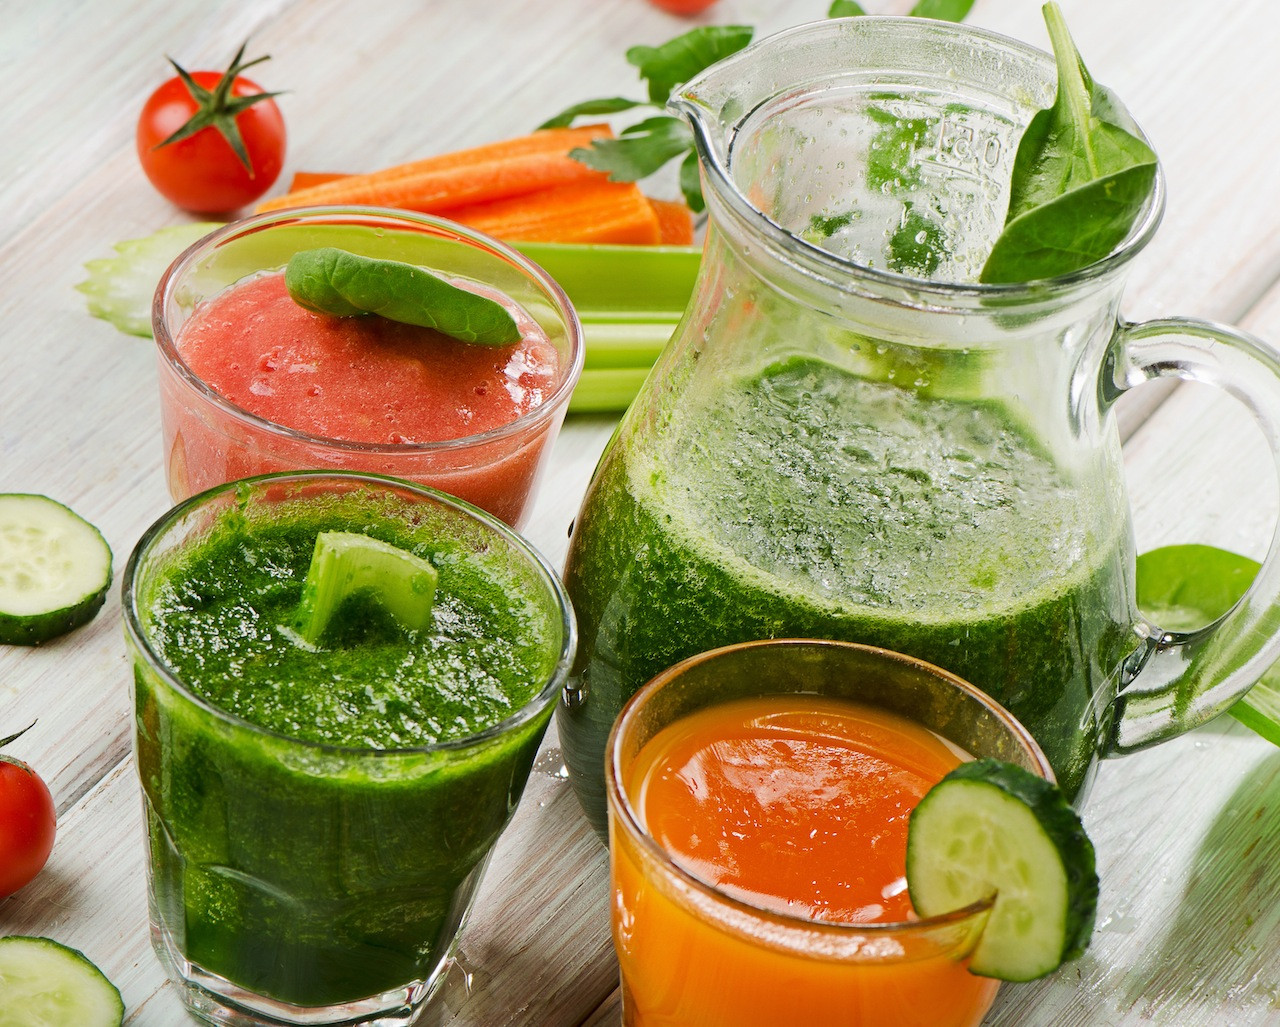 Diet Smoothie Recipes
 WatchFit Diet smoothie recipes that will keep you full